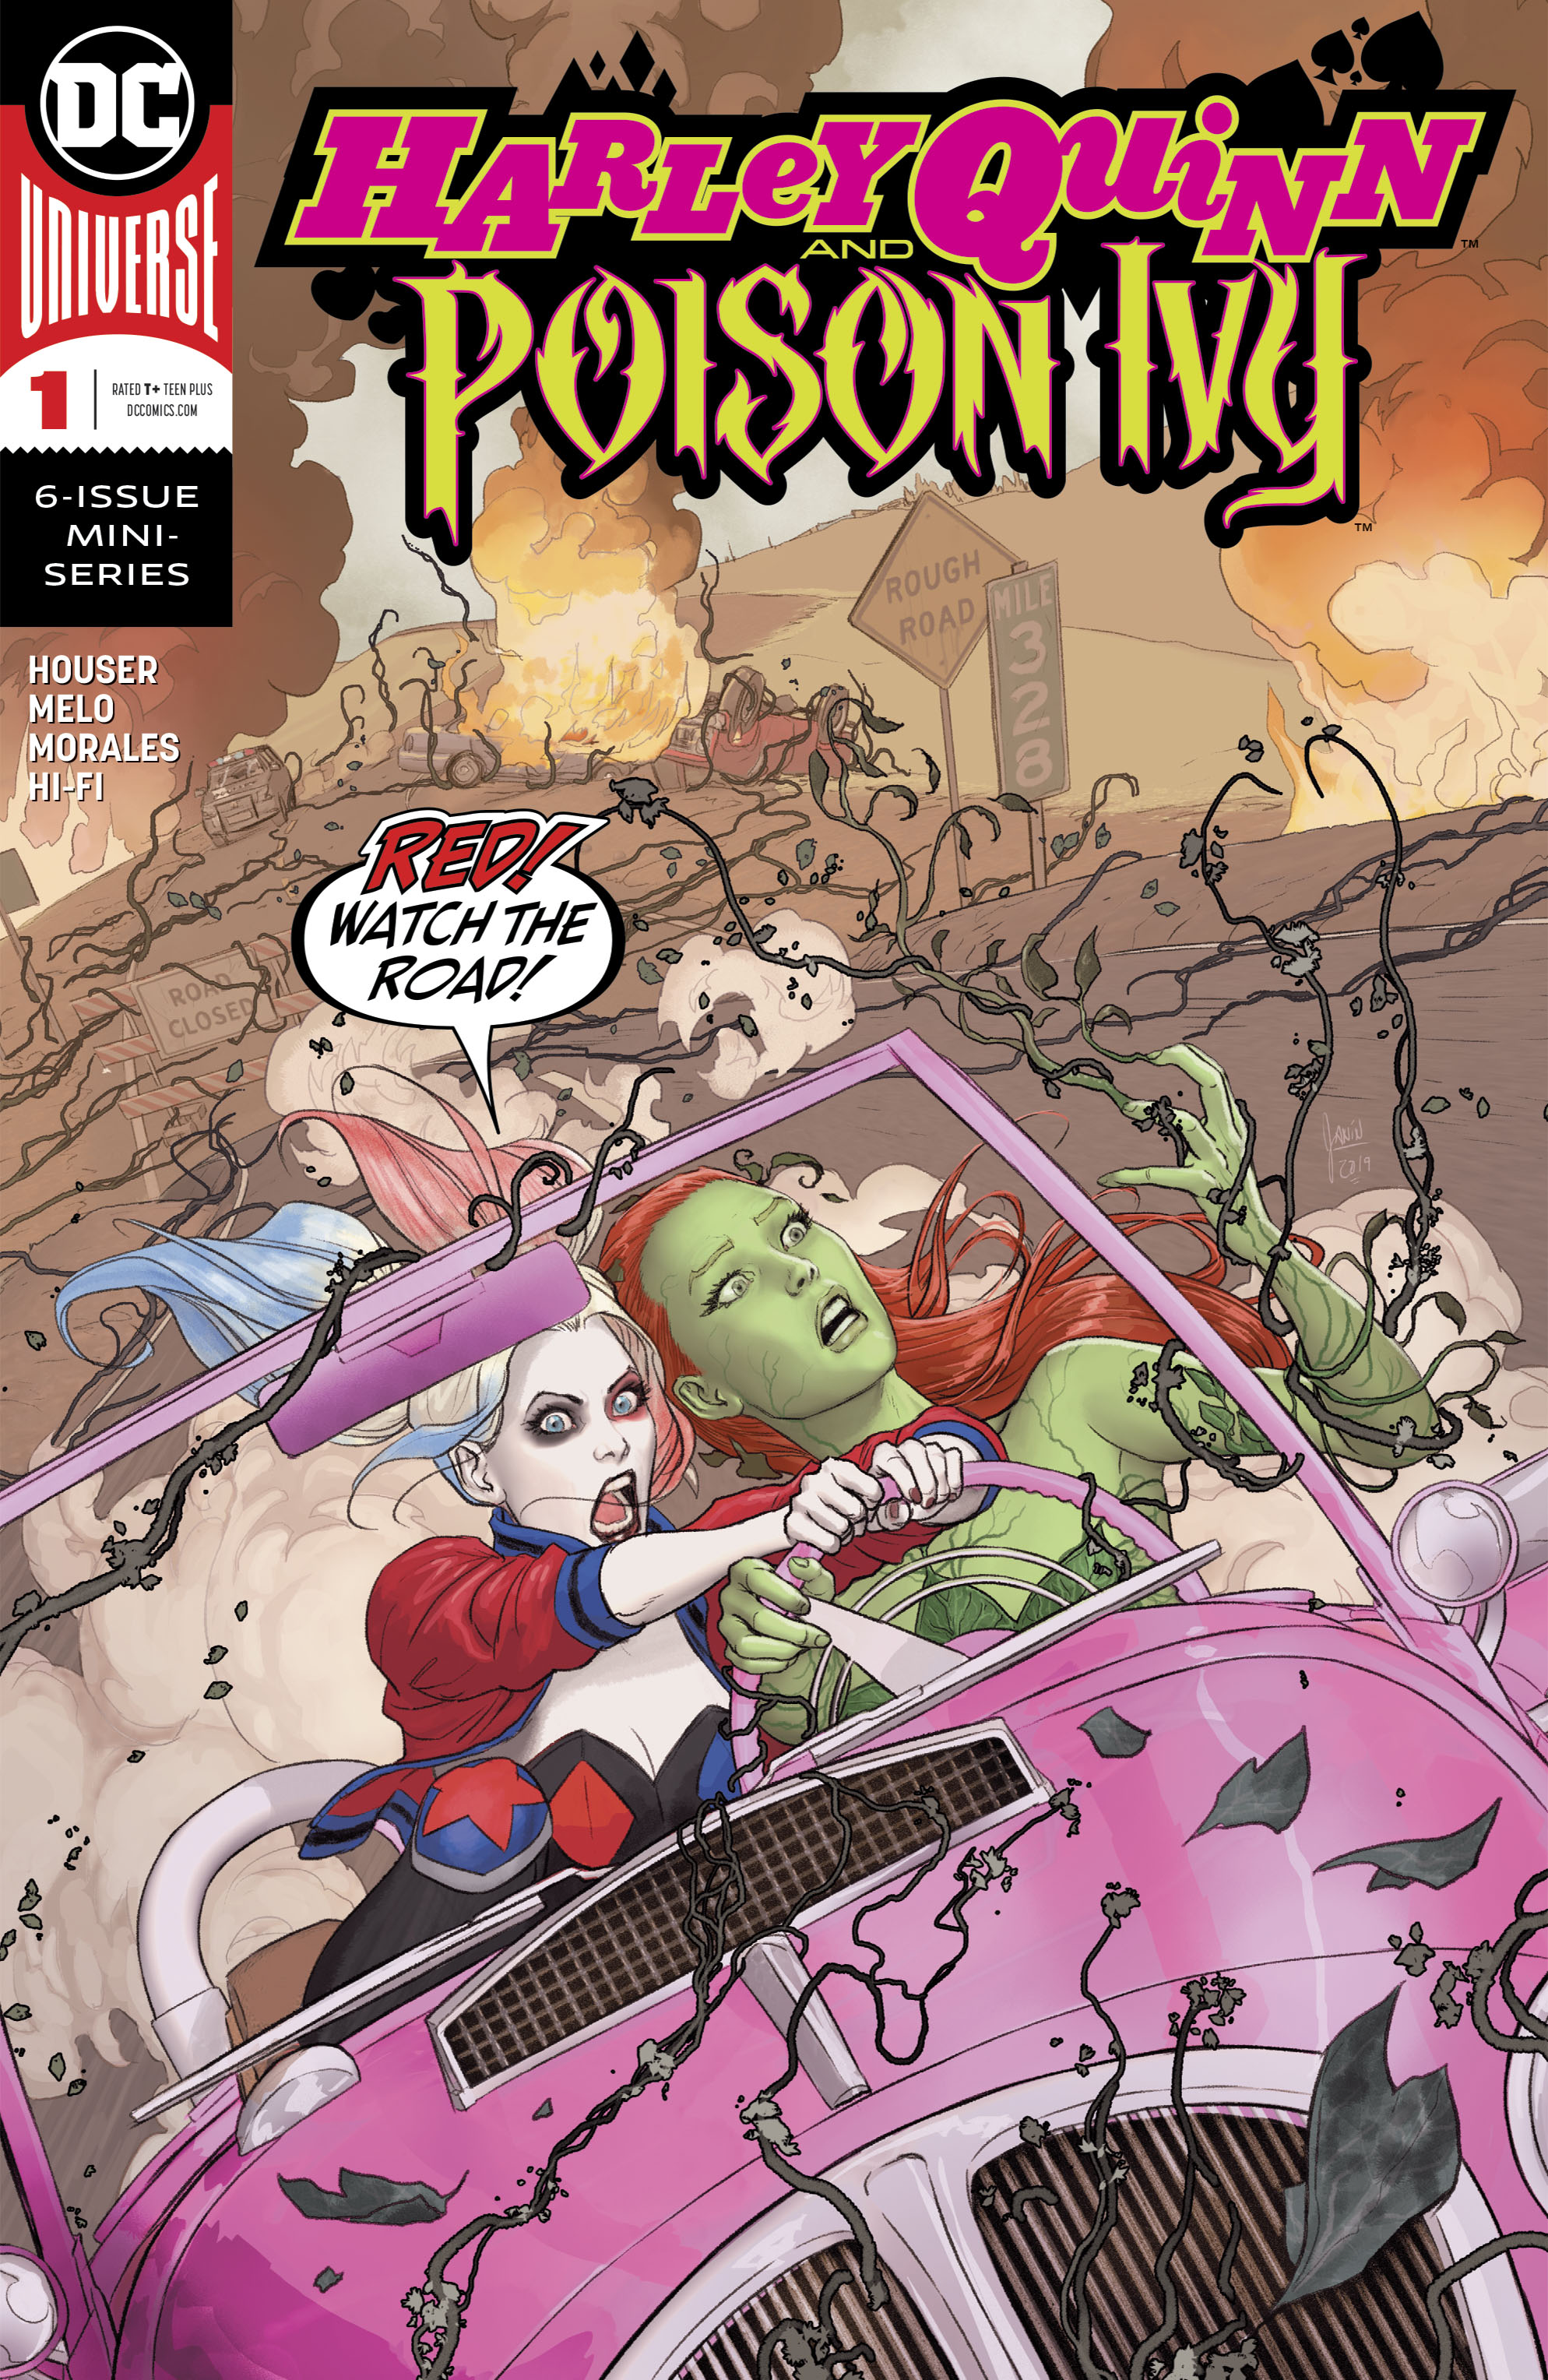 Read online Harley Quinn & Poison Ivy comic -  Issue #1 - 1